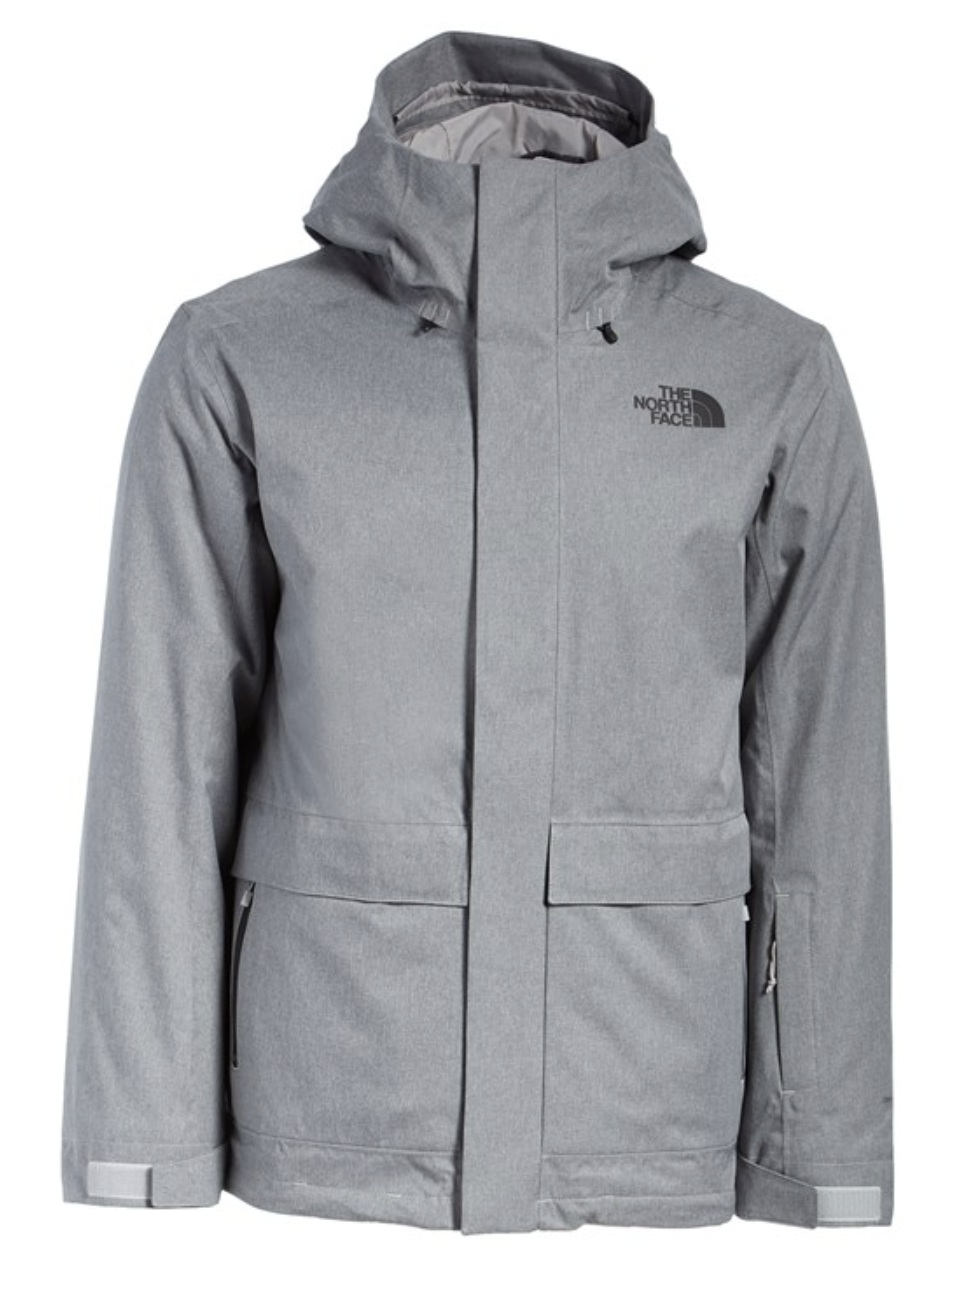 The North Face Clement Triclimate snowboard jacket